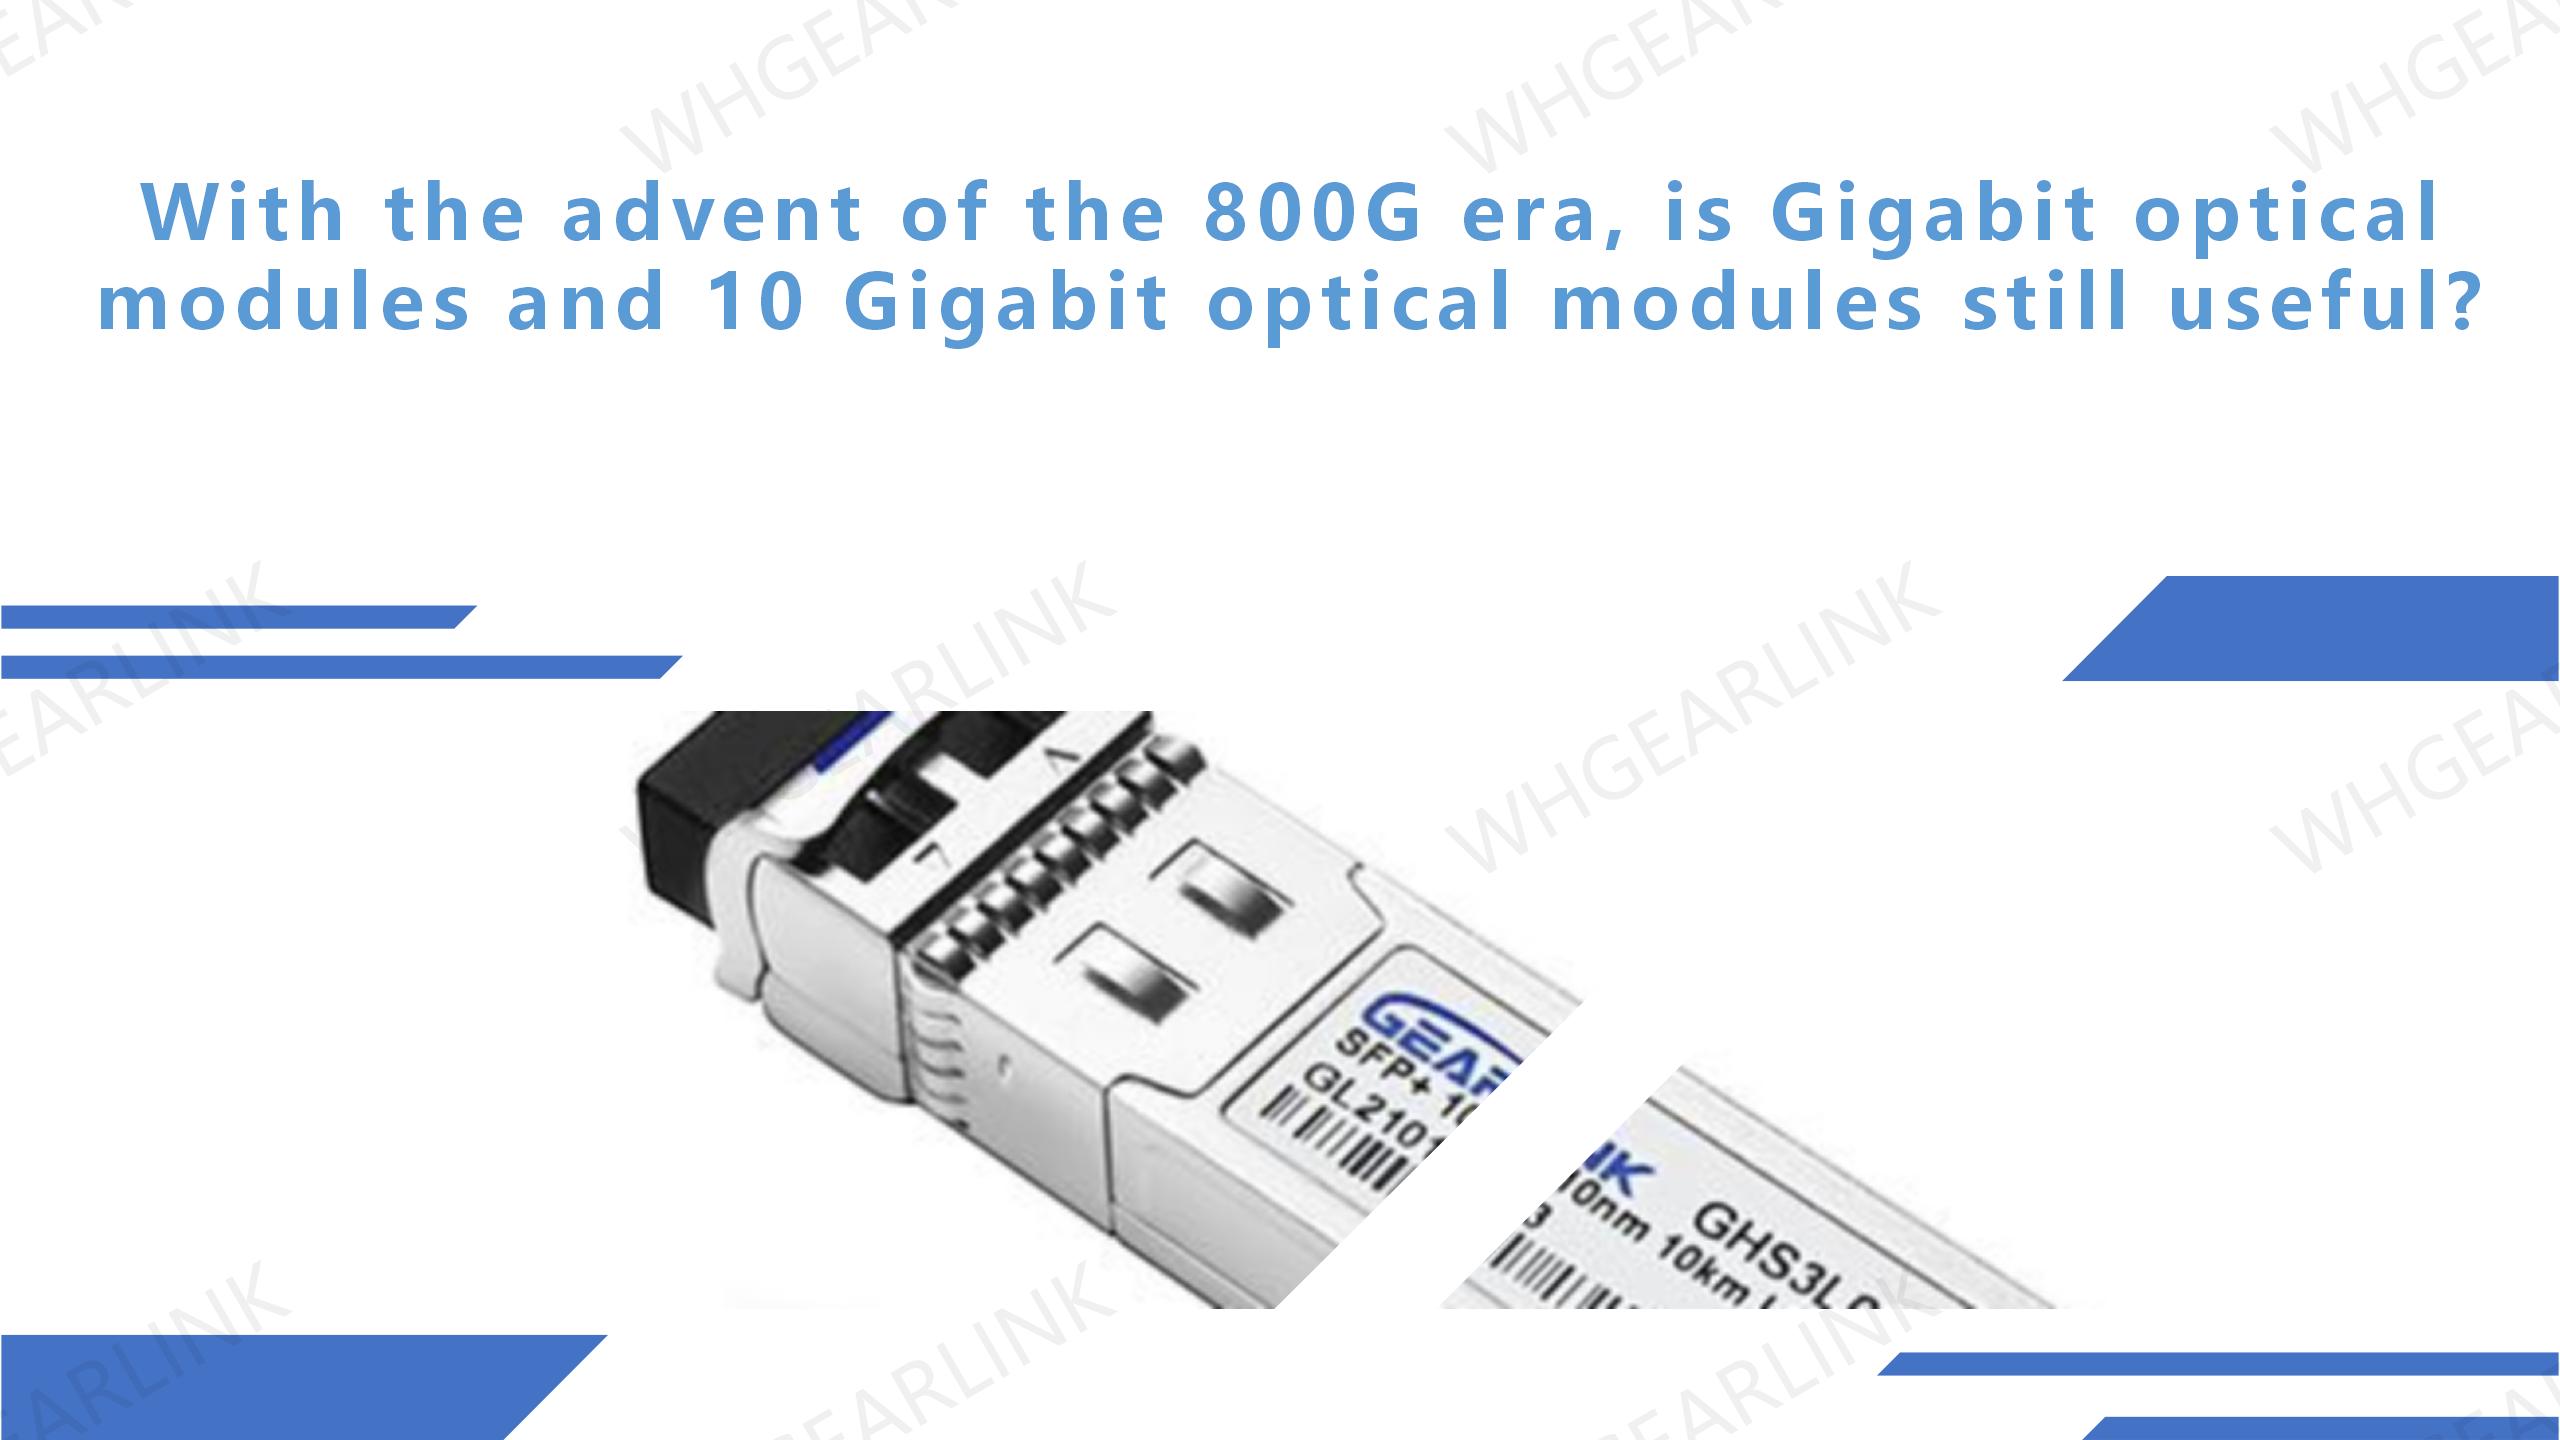 With the advent of the 800G era, is Gigabit optical modules and 10 Gigabit optical modules still useful?